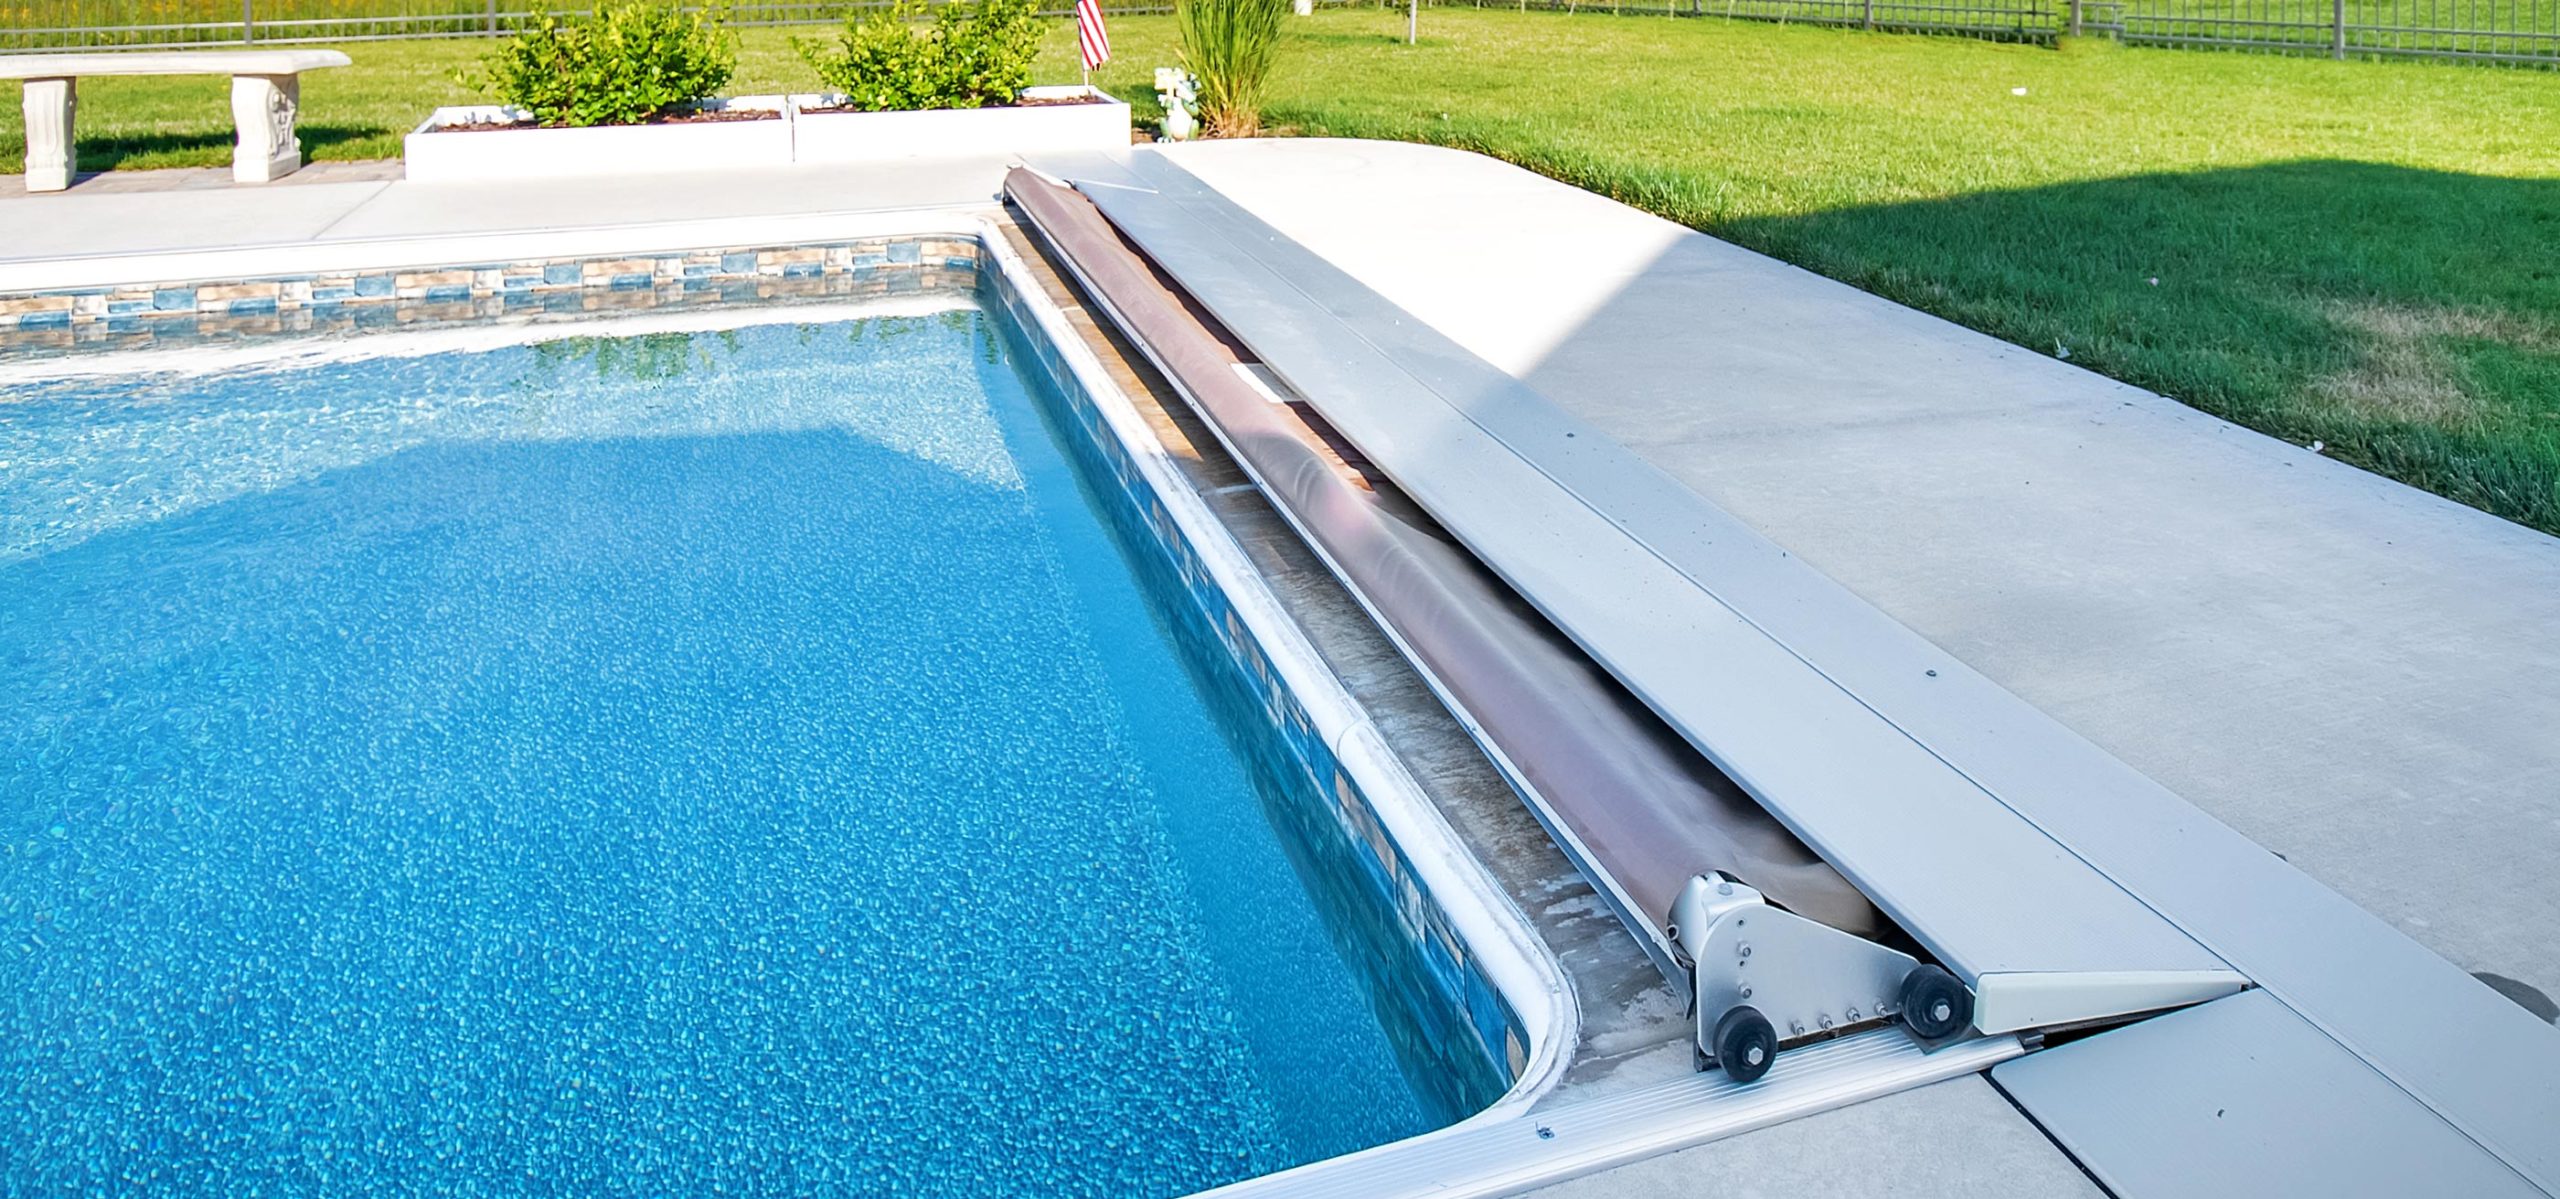 Automatic Retractable Safety Pool Covers | Latham Pool Products - Latham  Pool  Latham Pool